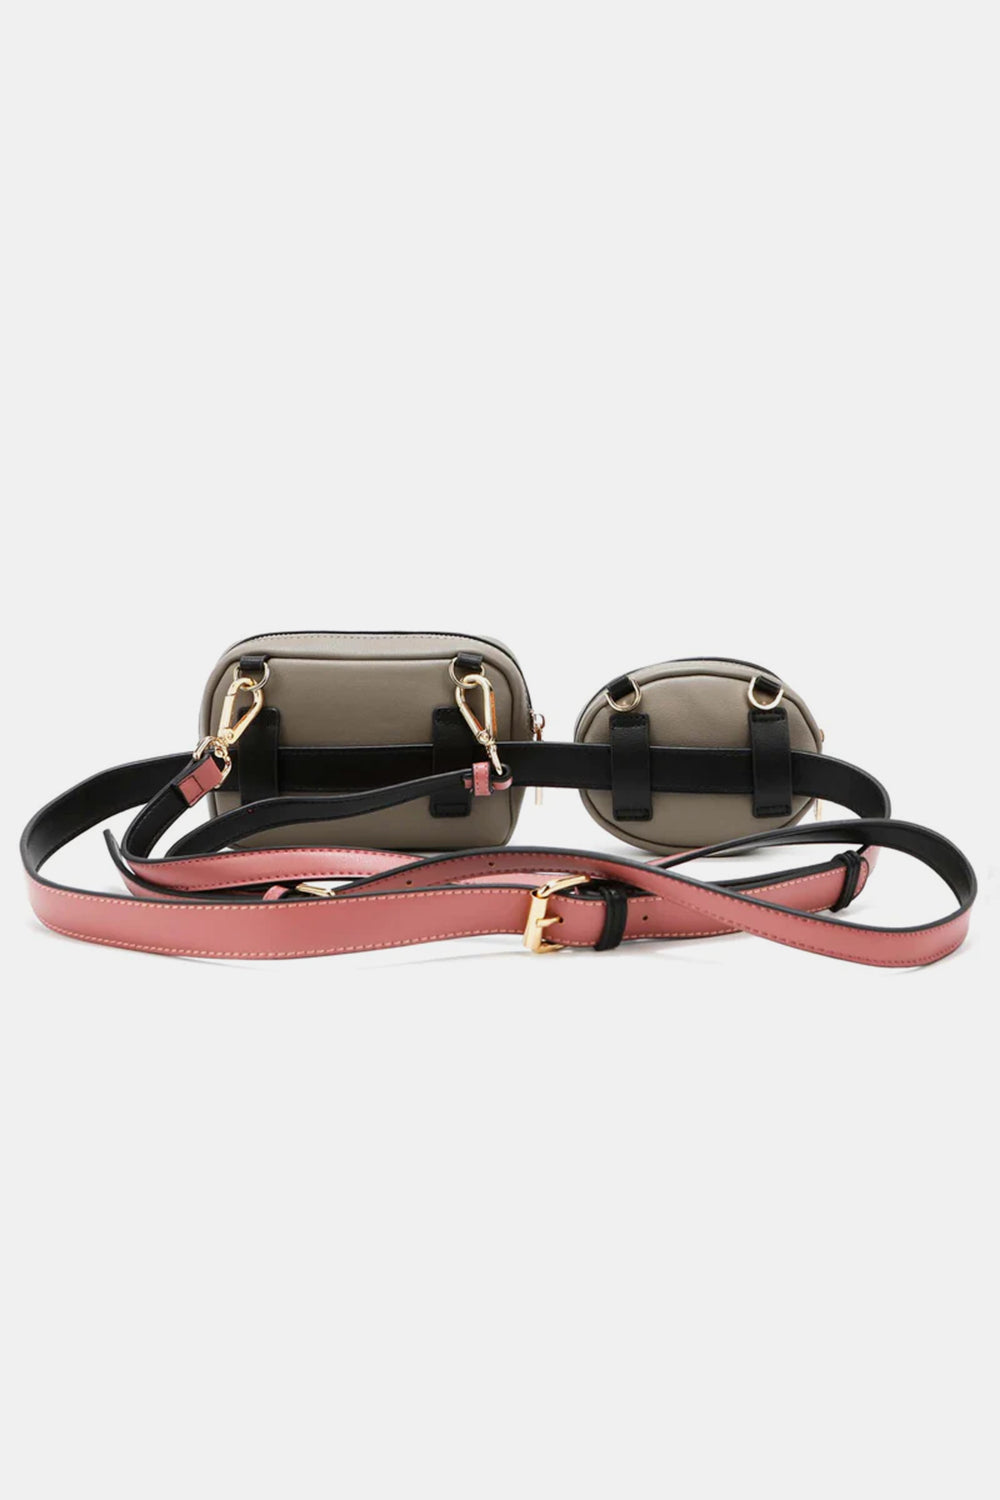 Nicole Lee USA Double Pouch Fanny Pack